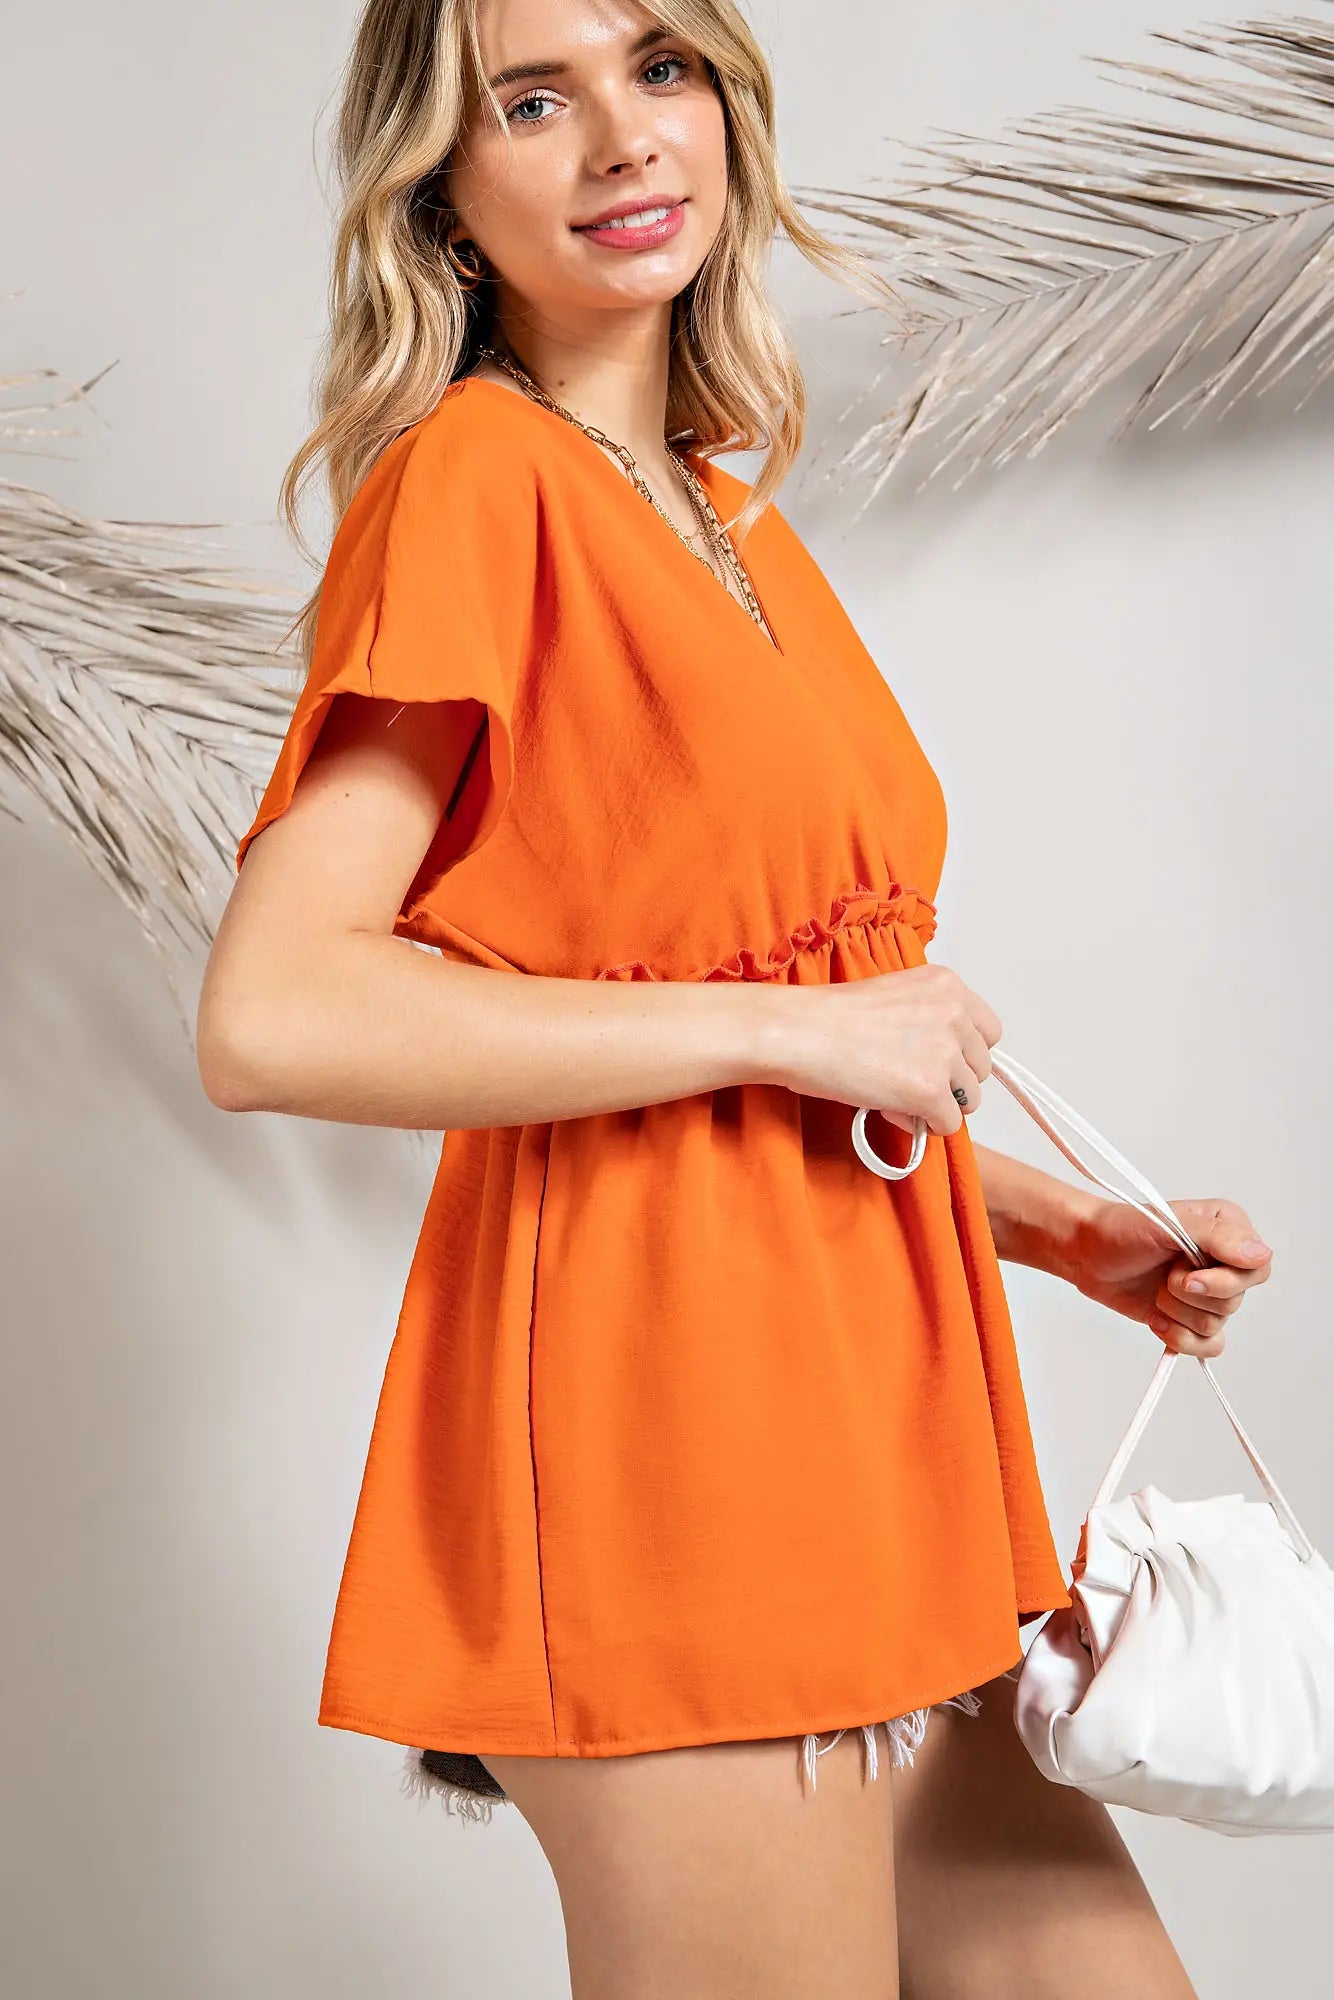 This airy, woven blouse top features a surpliced front with contrasting edge ruffle detail, plus a tiered waist. This modern design will become a wardrobe staple for the San Luis Obispo woman– perfect for everything from days at the office to weekend brunch